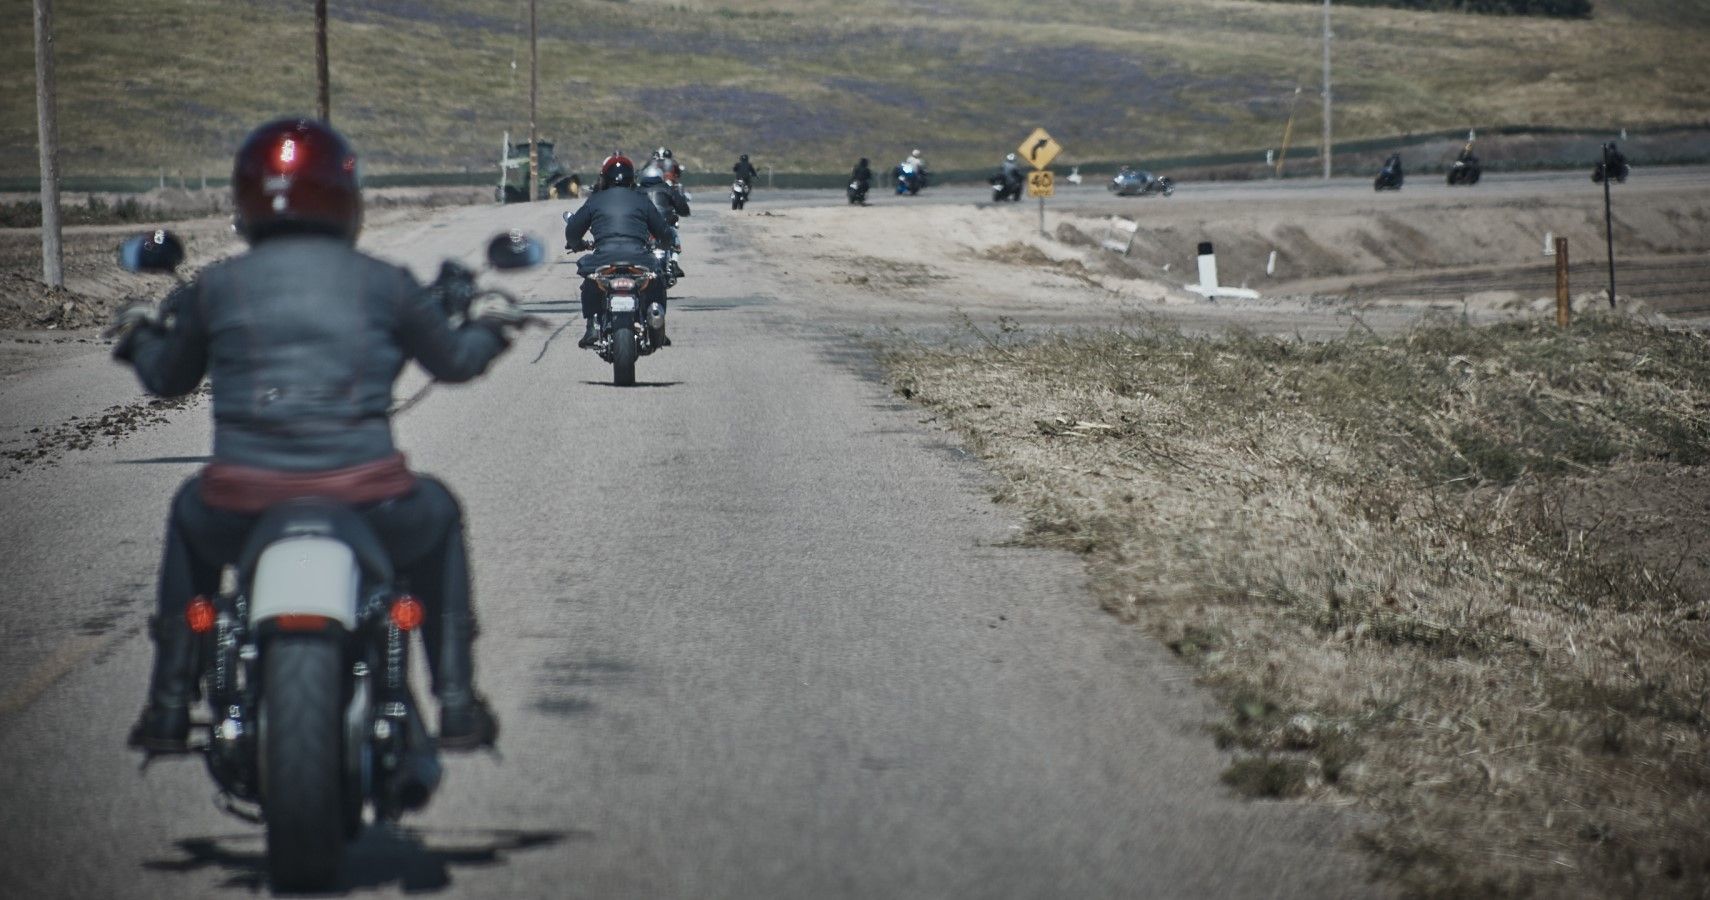 Why we ride to the quail group ride is a three-day long excursion across America